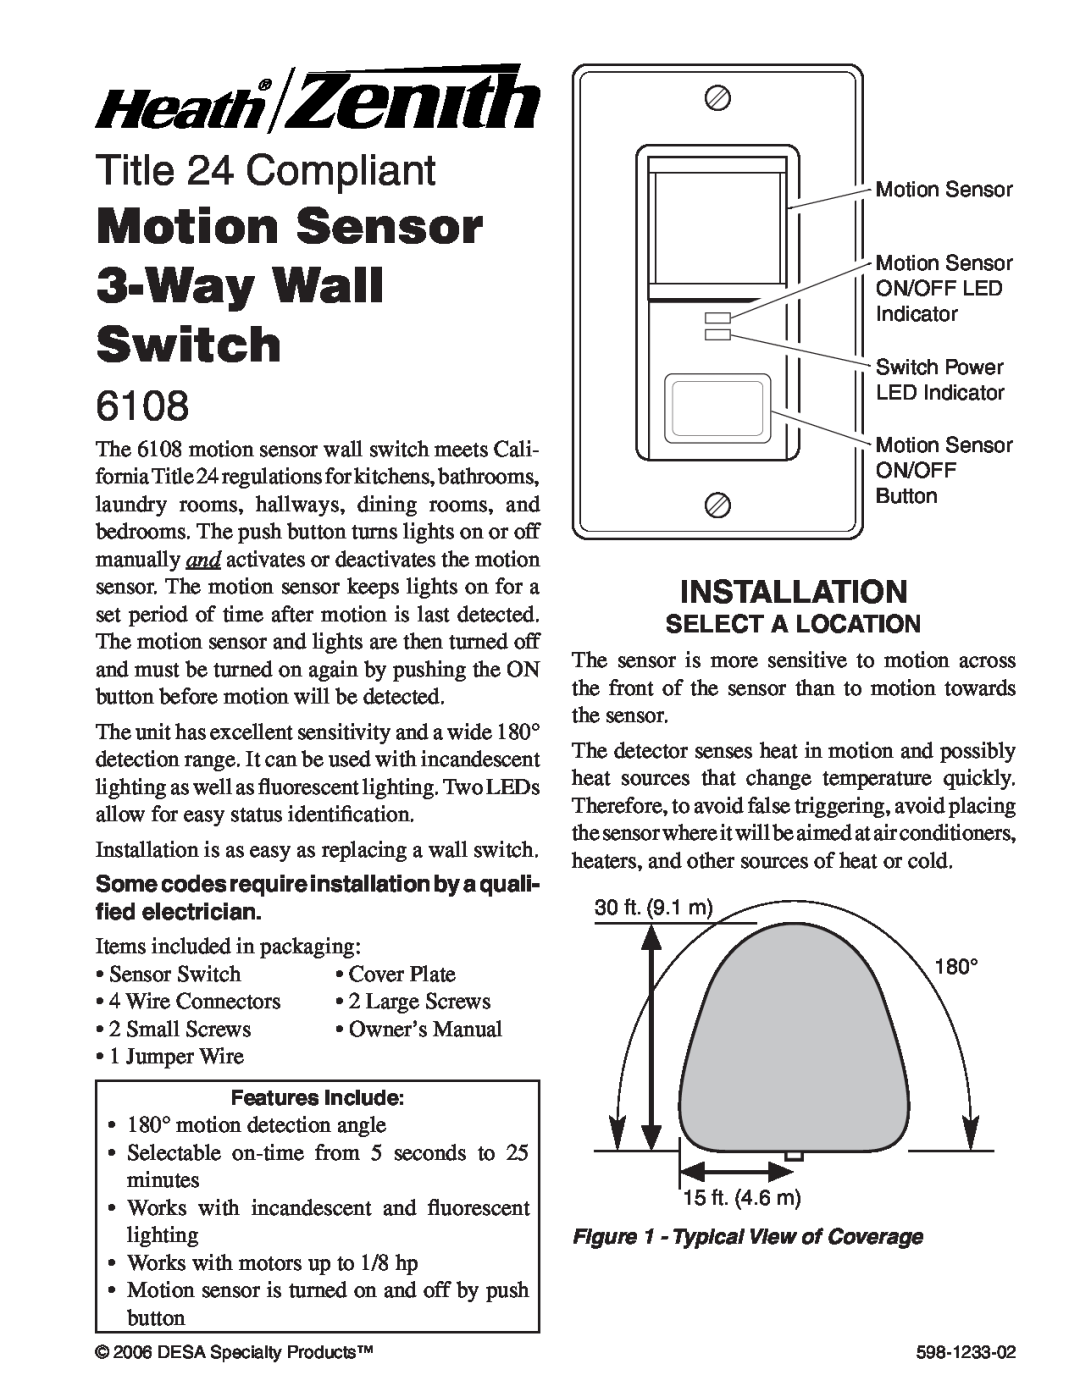 Heath Zenith 6108 owner manual Motion Sensor 3-WayWall Switch, Title 24 Compliant, Installation, Select A Location 